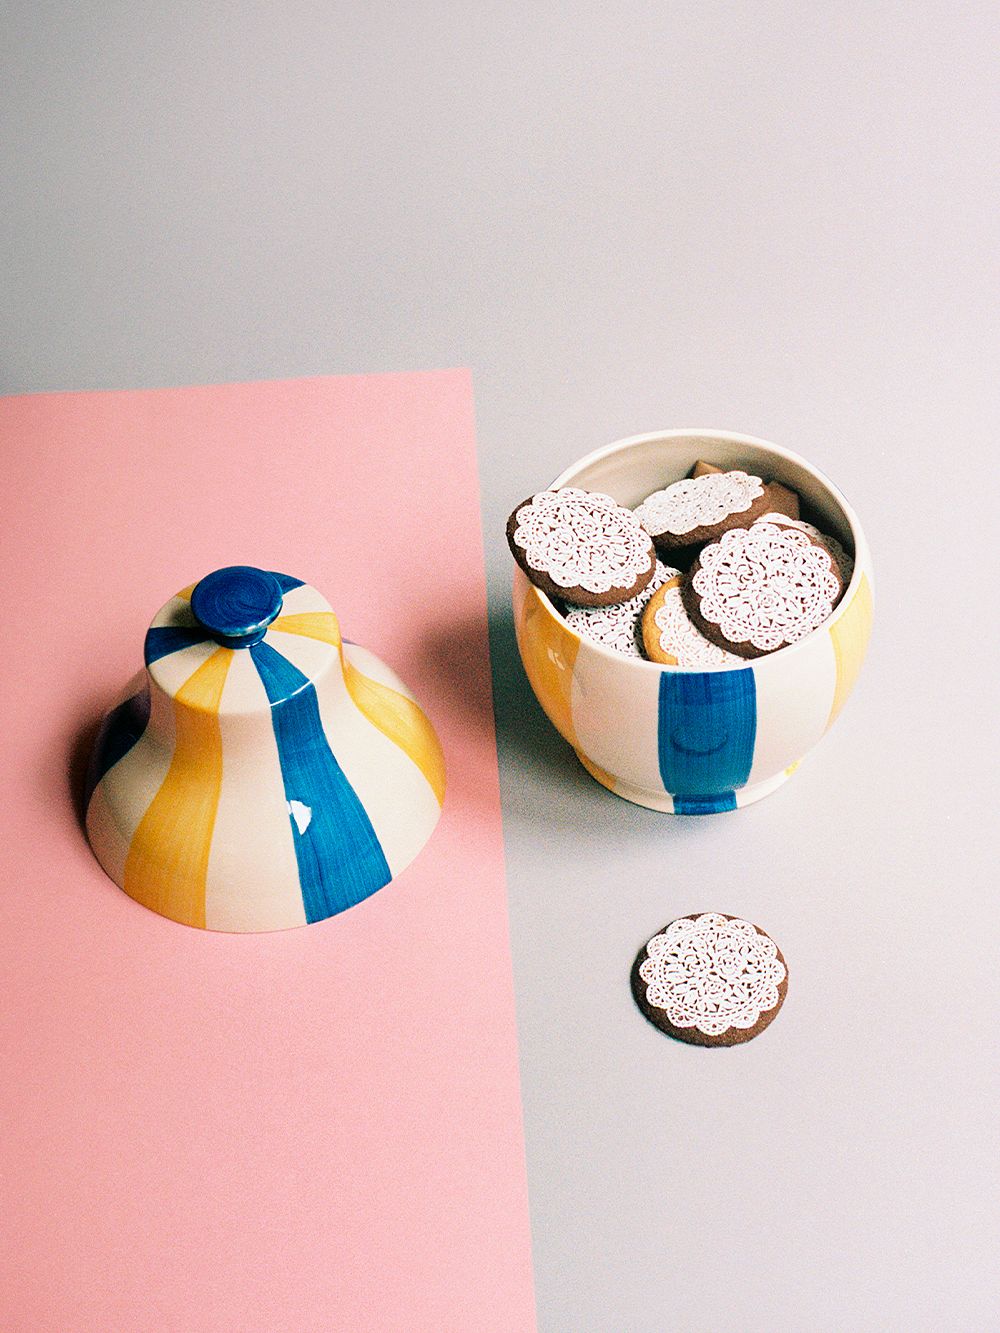 An image with HAY's Sobremesa Stripe cookie jar against a pink background.